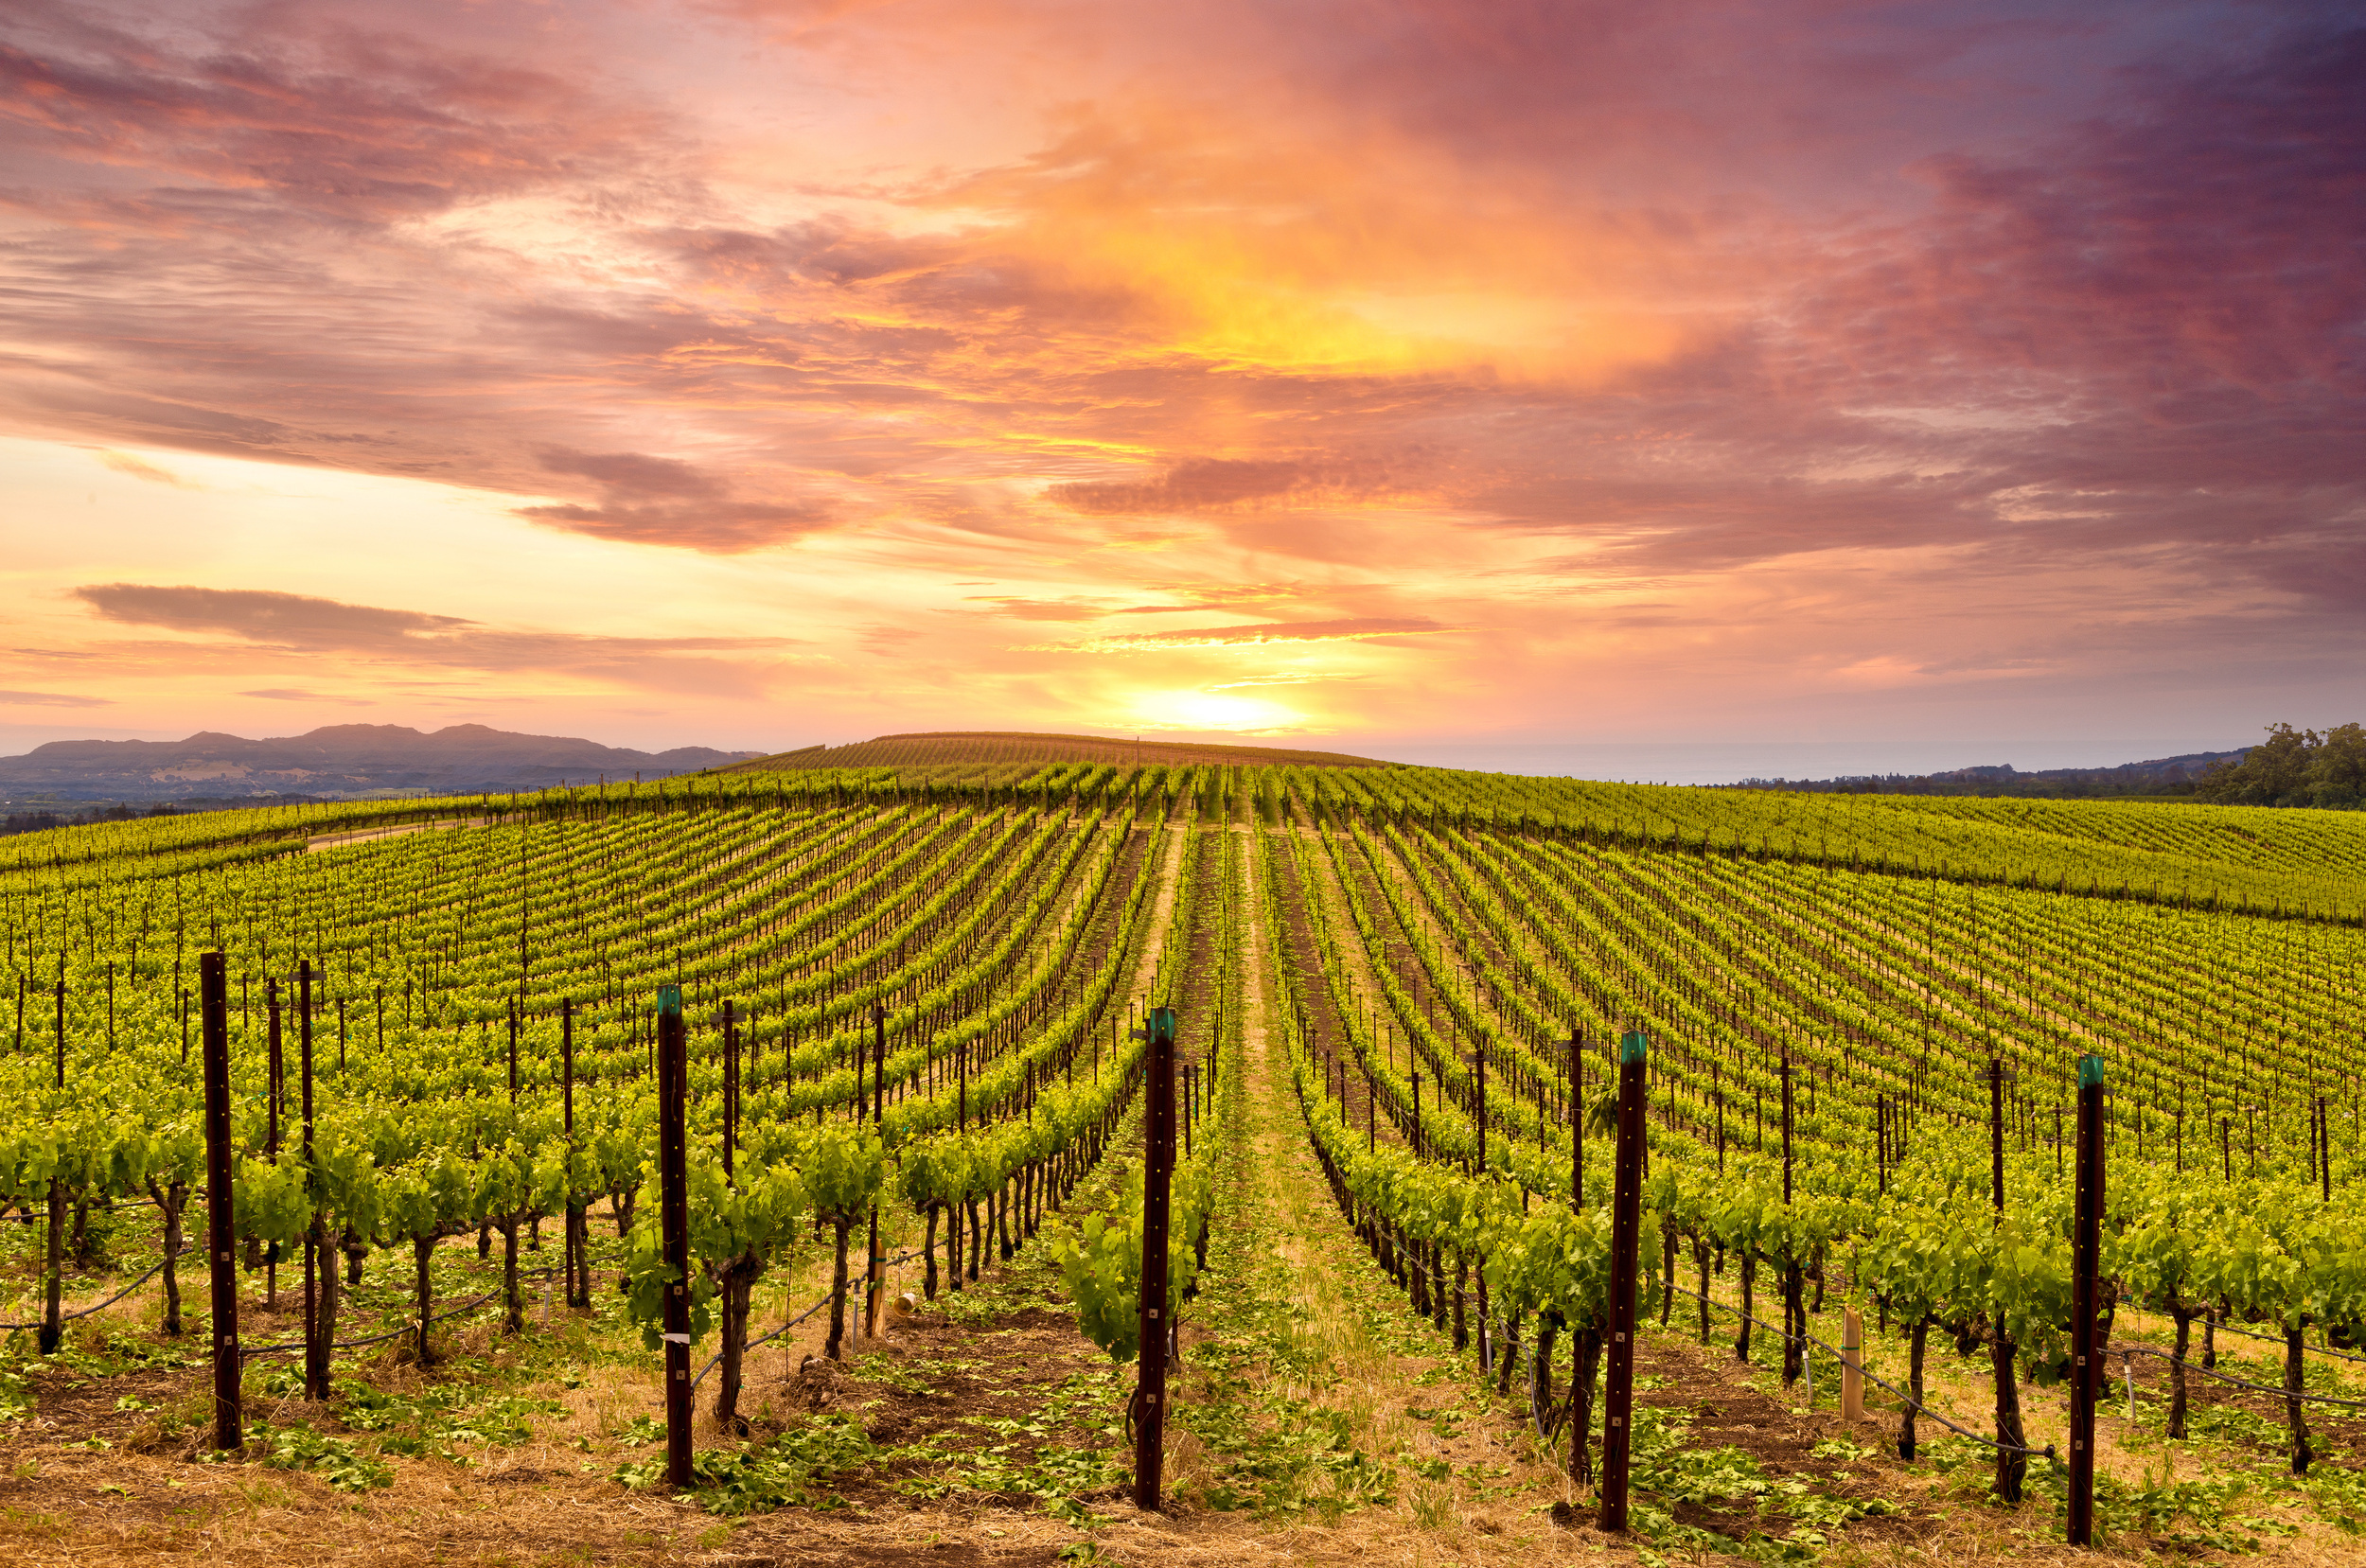 <p>Another option to the itinerary above starting in Eugene is to skip nature and head right into wine country via the Willamette Scenic Highway. An easy day trip, or you can stay a few nights and visit every winery.</p><p>You may also like: <a href='https://www.yardbarker.com/lifestyle/articles/22_meals_perfect_for_following_mediterranean_diet_112423/s1__38389200'>22 meals perfect for following Mediterranean diet</a></p>